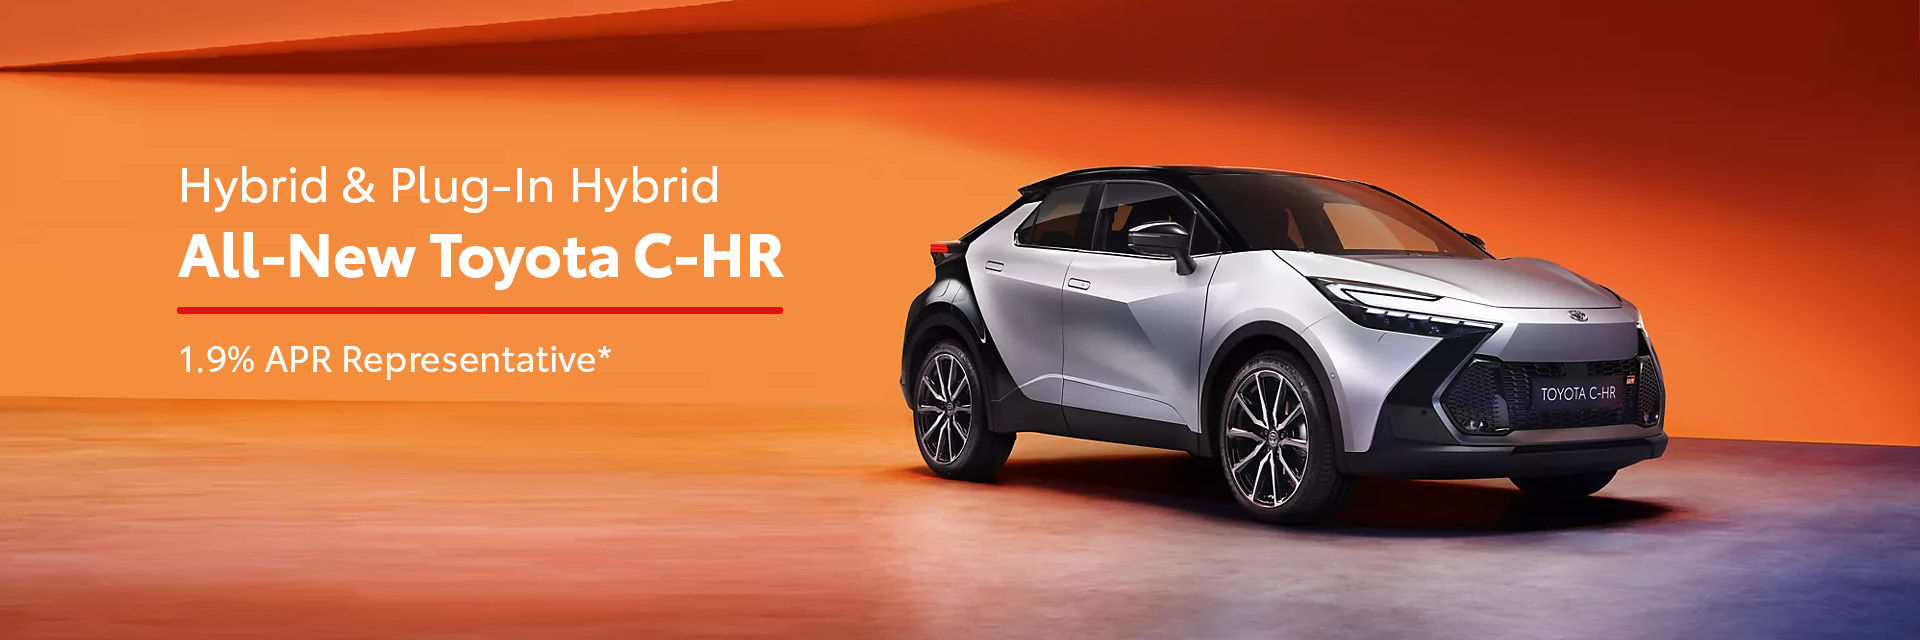 All New Toyota C-HR with 1.9% APR Finance